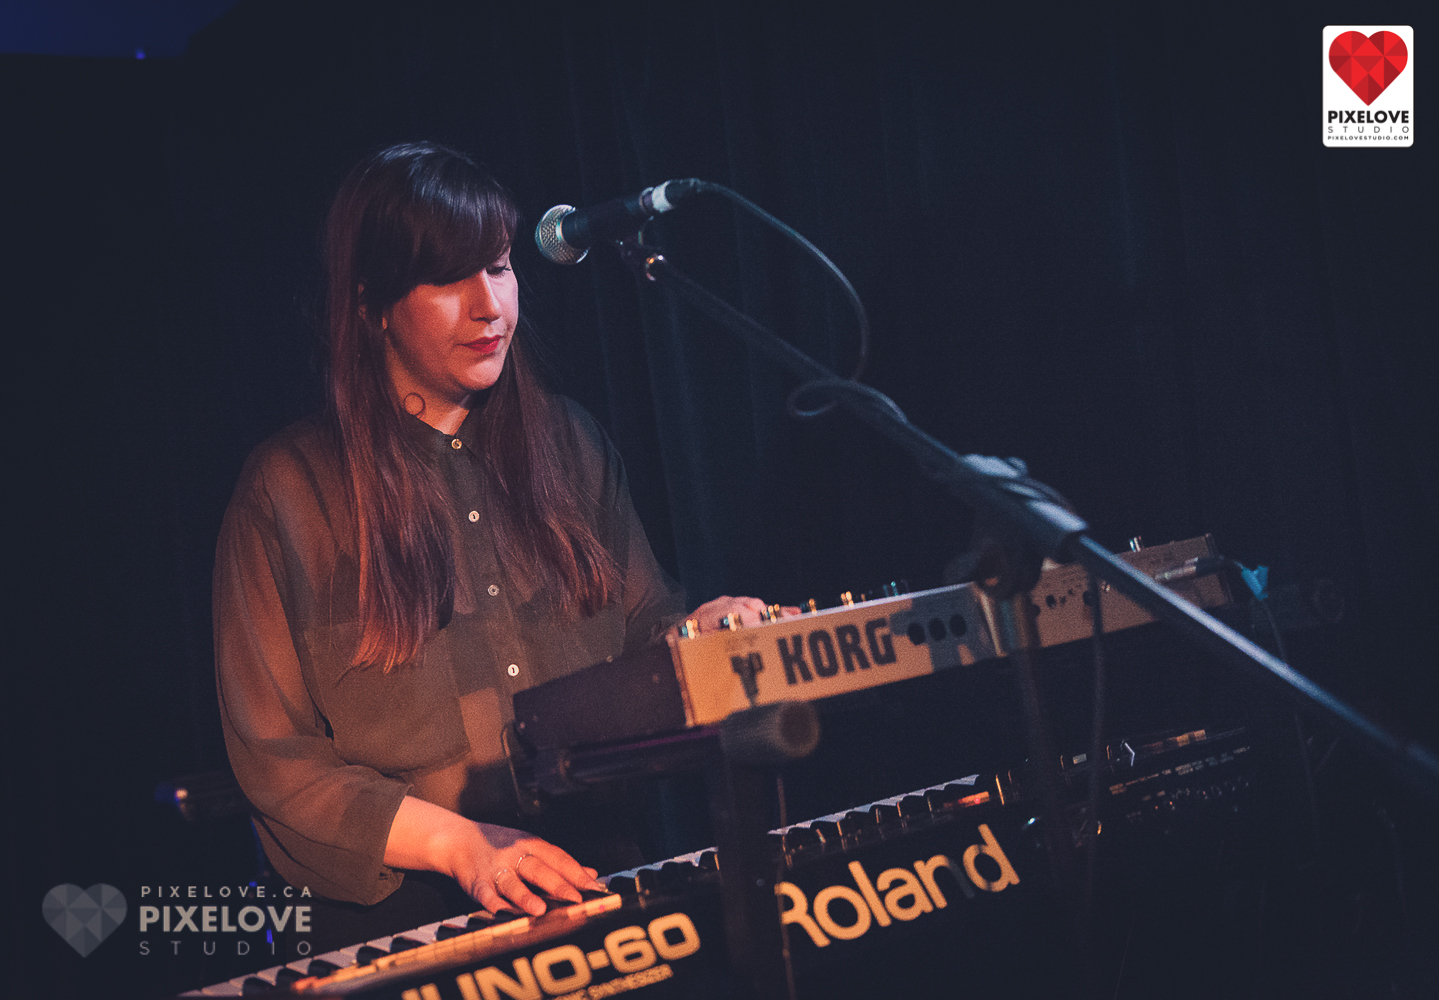 The Zolas performed at Divan Orange in Montreal. Photography by Pixelove Studio in Montreal, Canada.